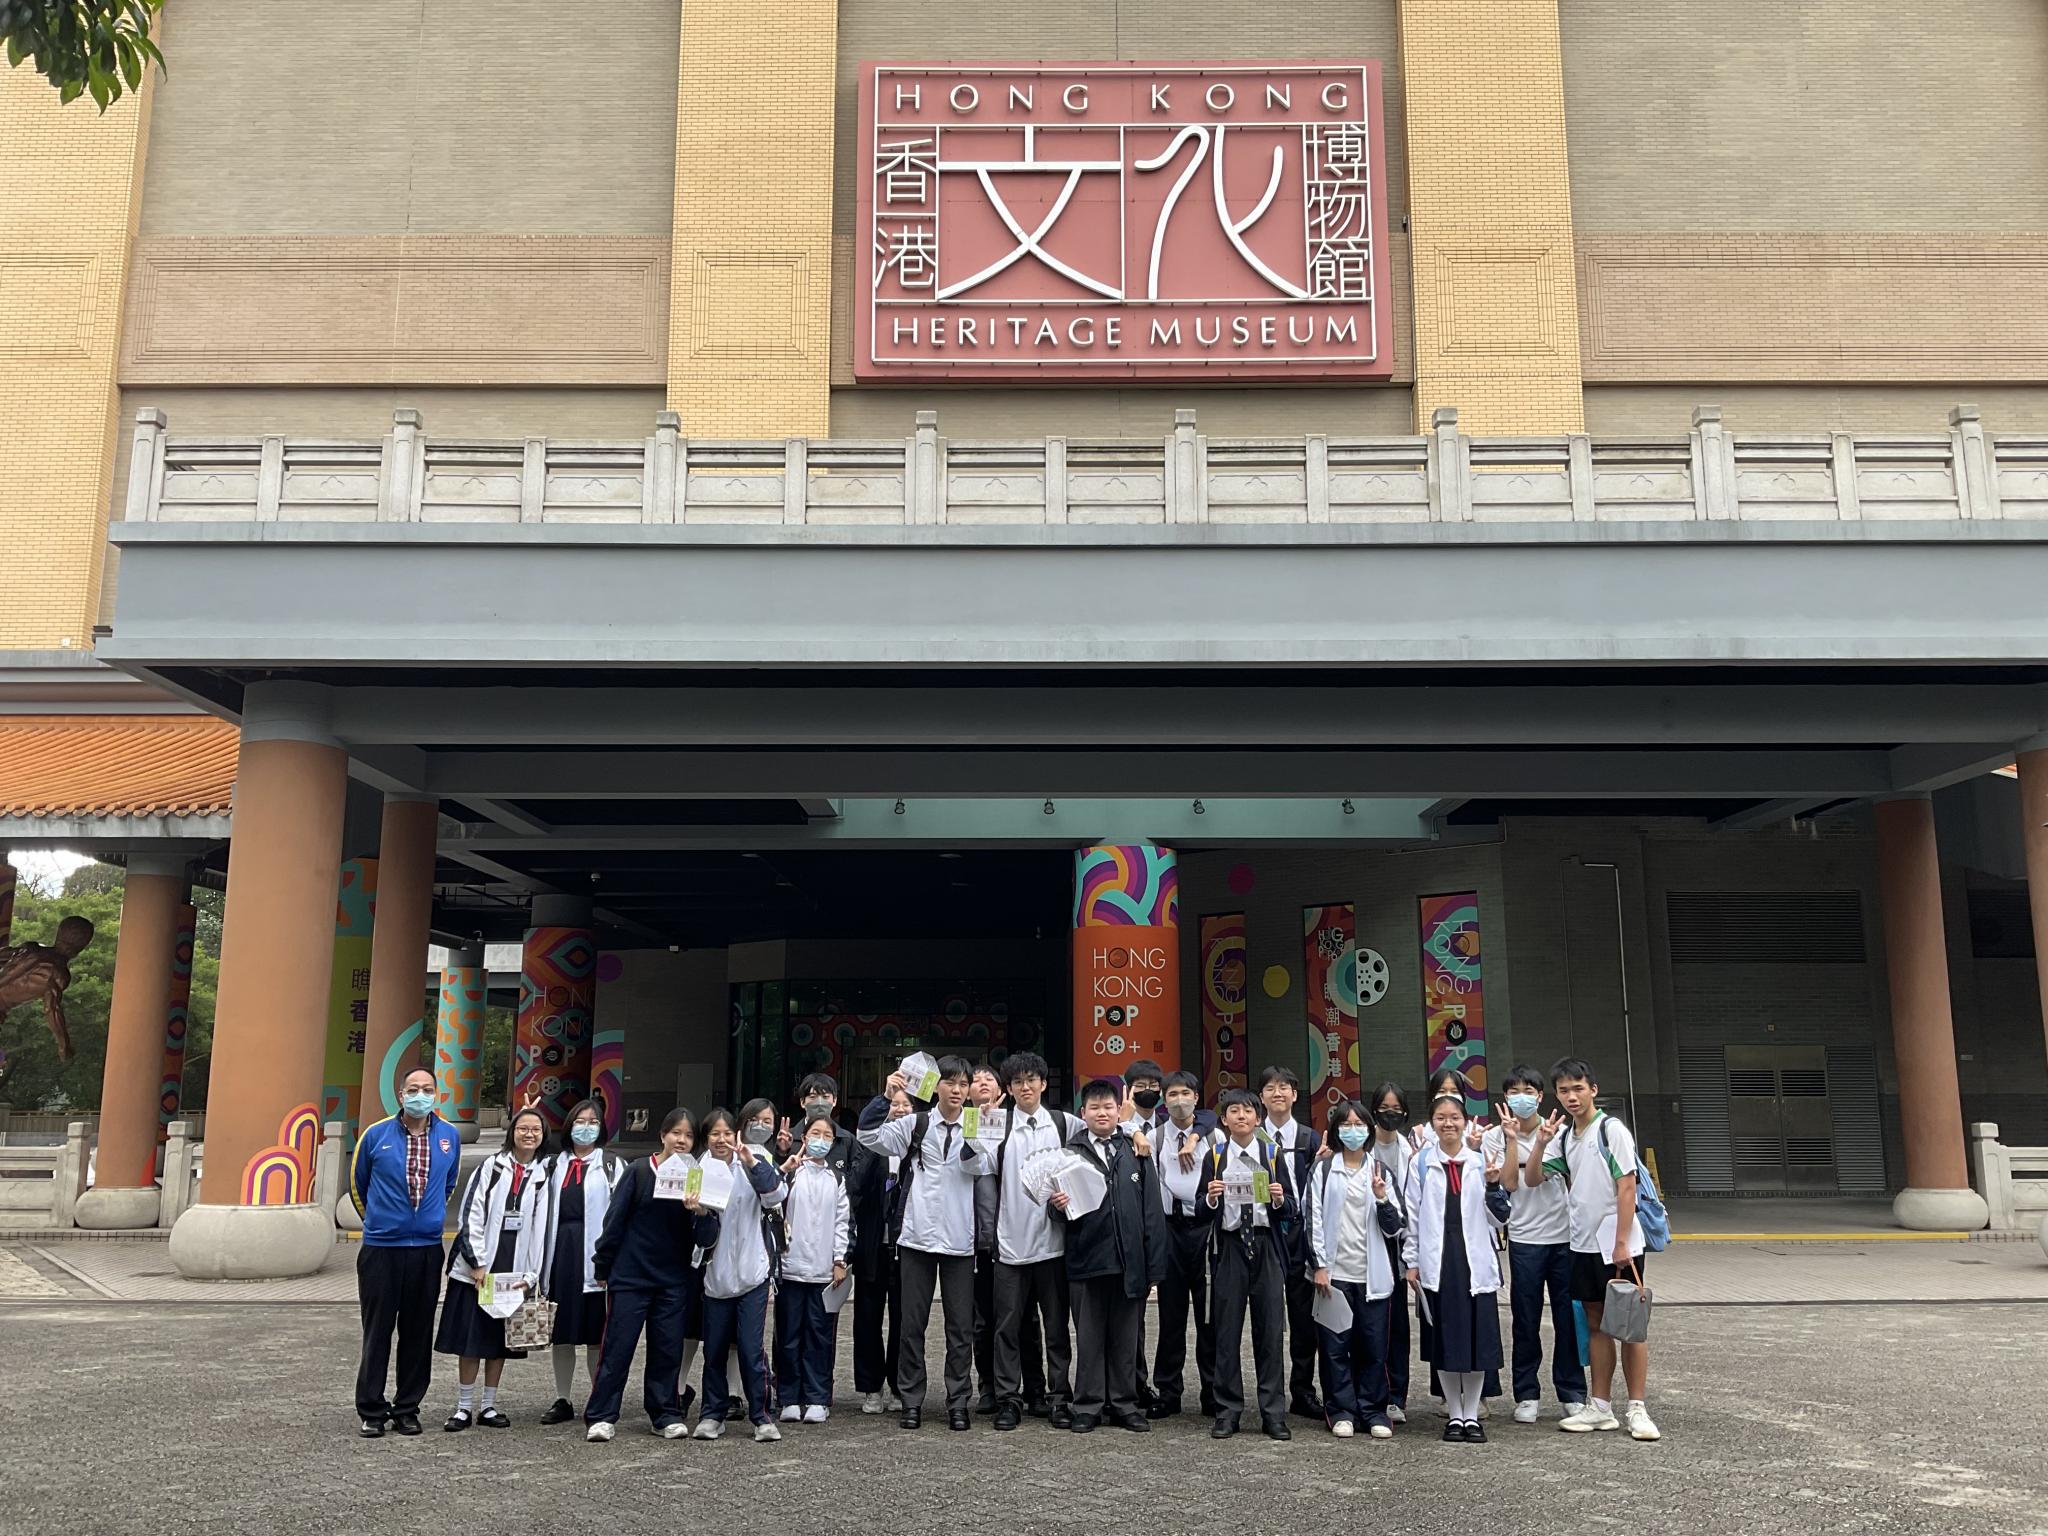 The teachers and students of our school take a group photo in front of the Hong Kong Heritage Museum.